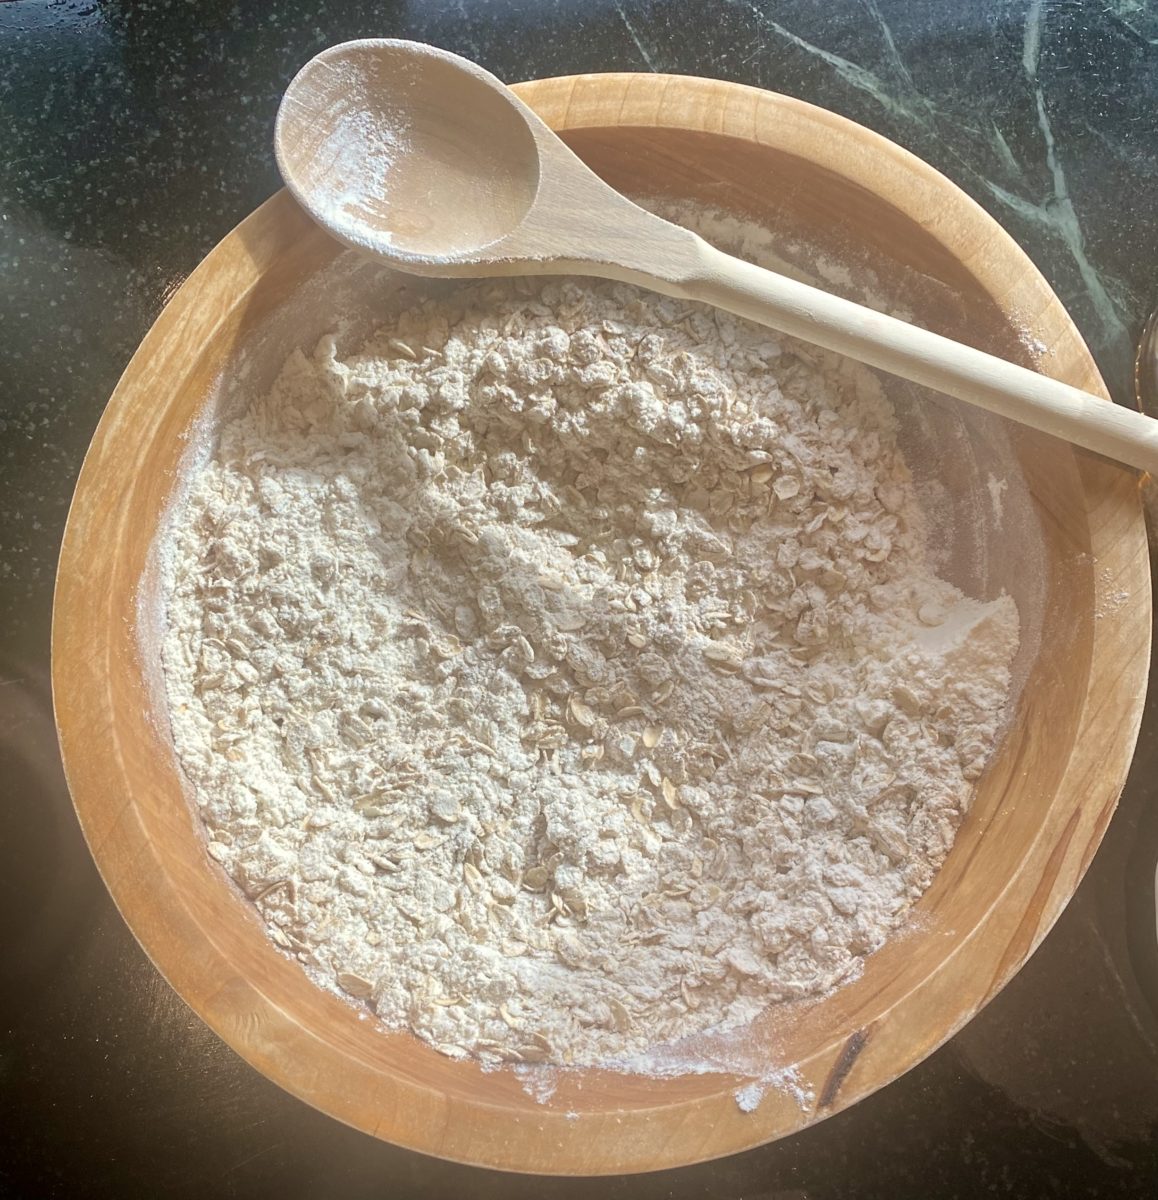 a wooden bowl and spoon filled with flour mixed with dry oatmeal